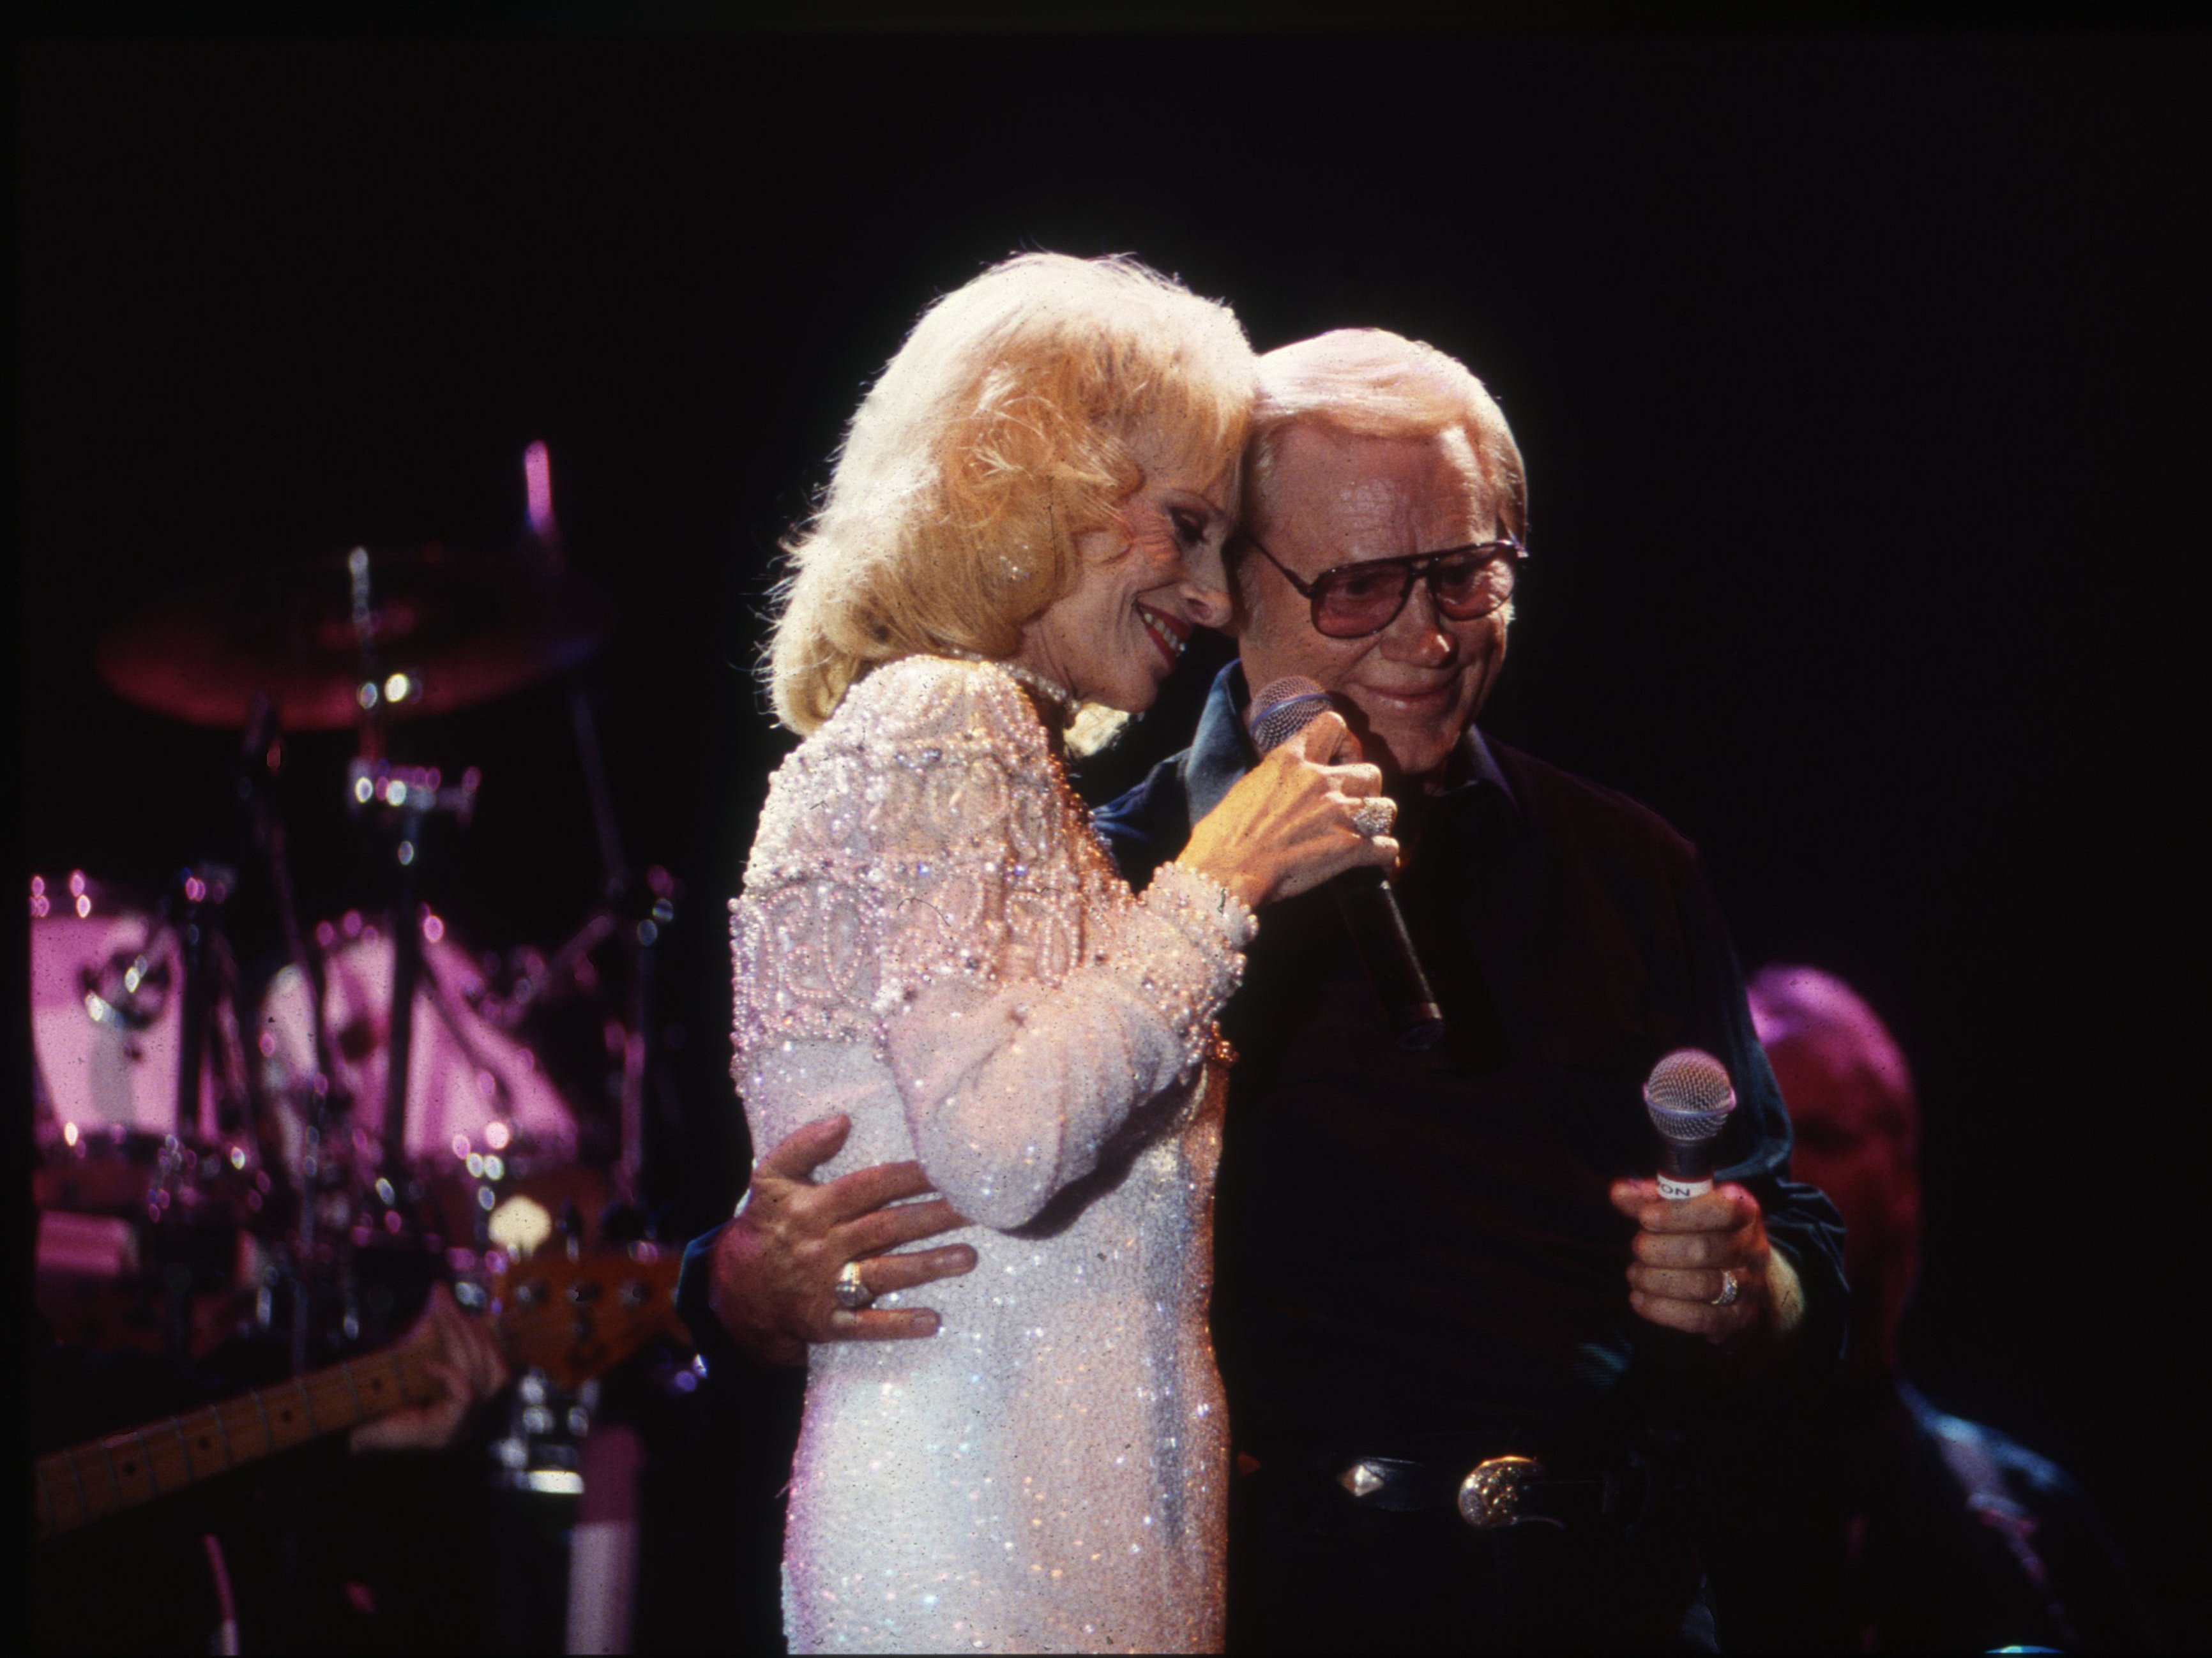 Country Music Singer Songwriter Tammy Wynette and George Jones performs at Fanfair on January 1, 1995 in Nashville, Tennessee. | Source: Getty Images